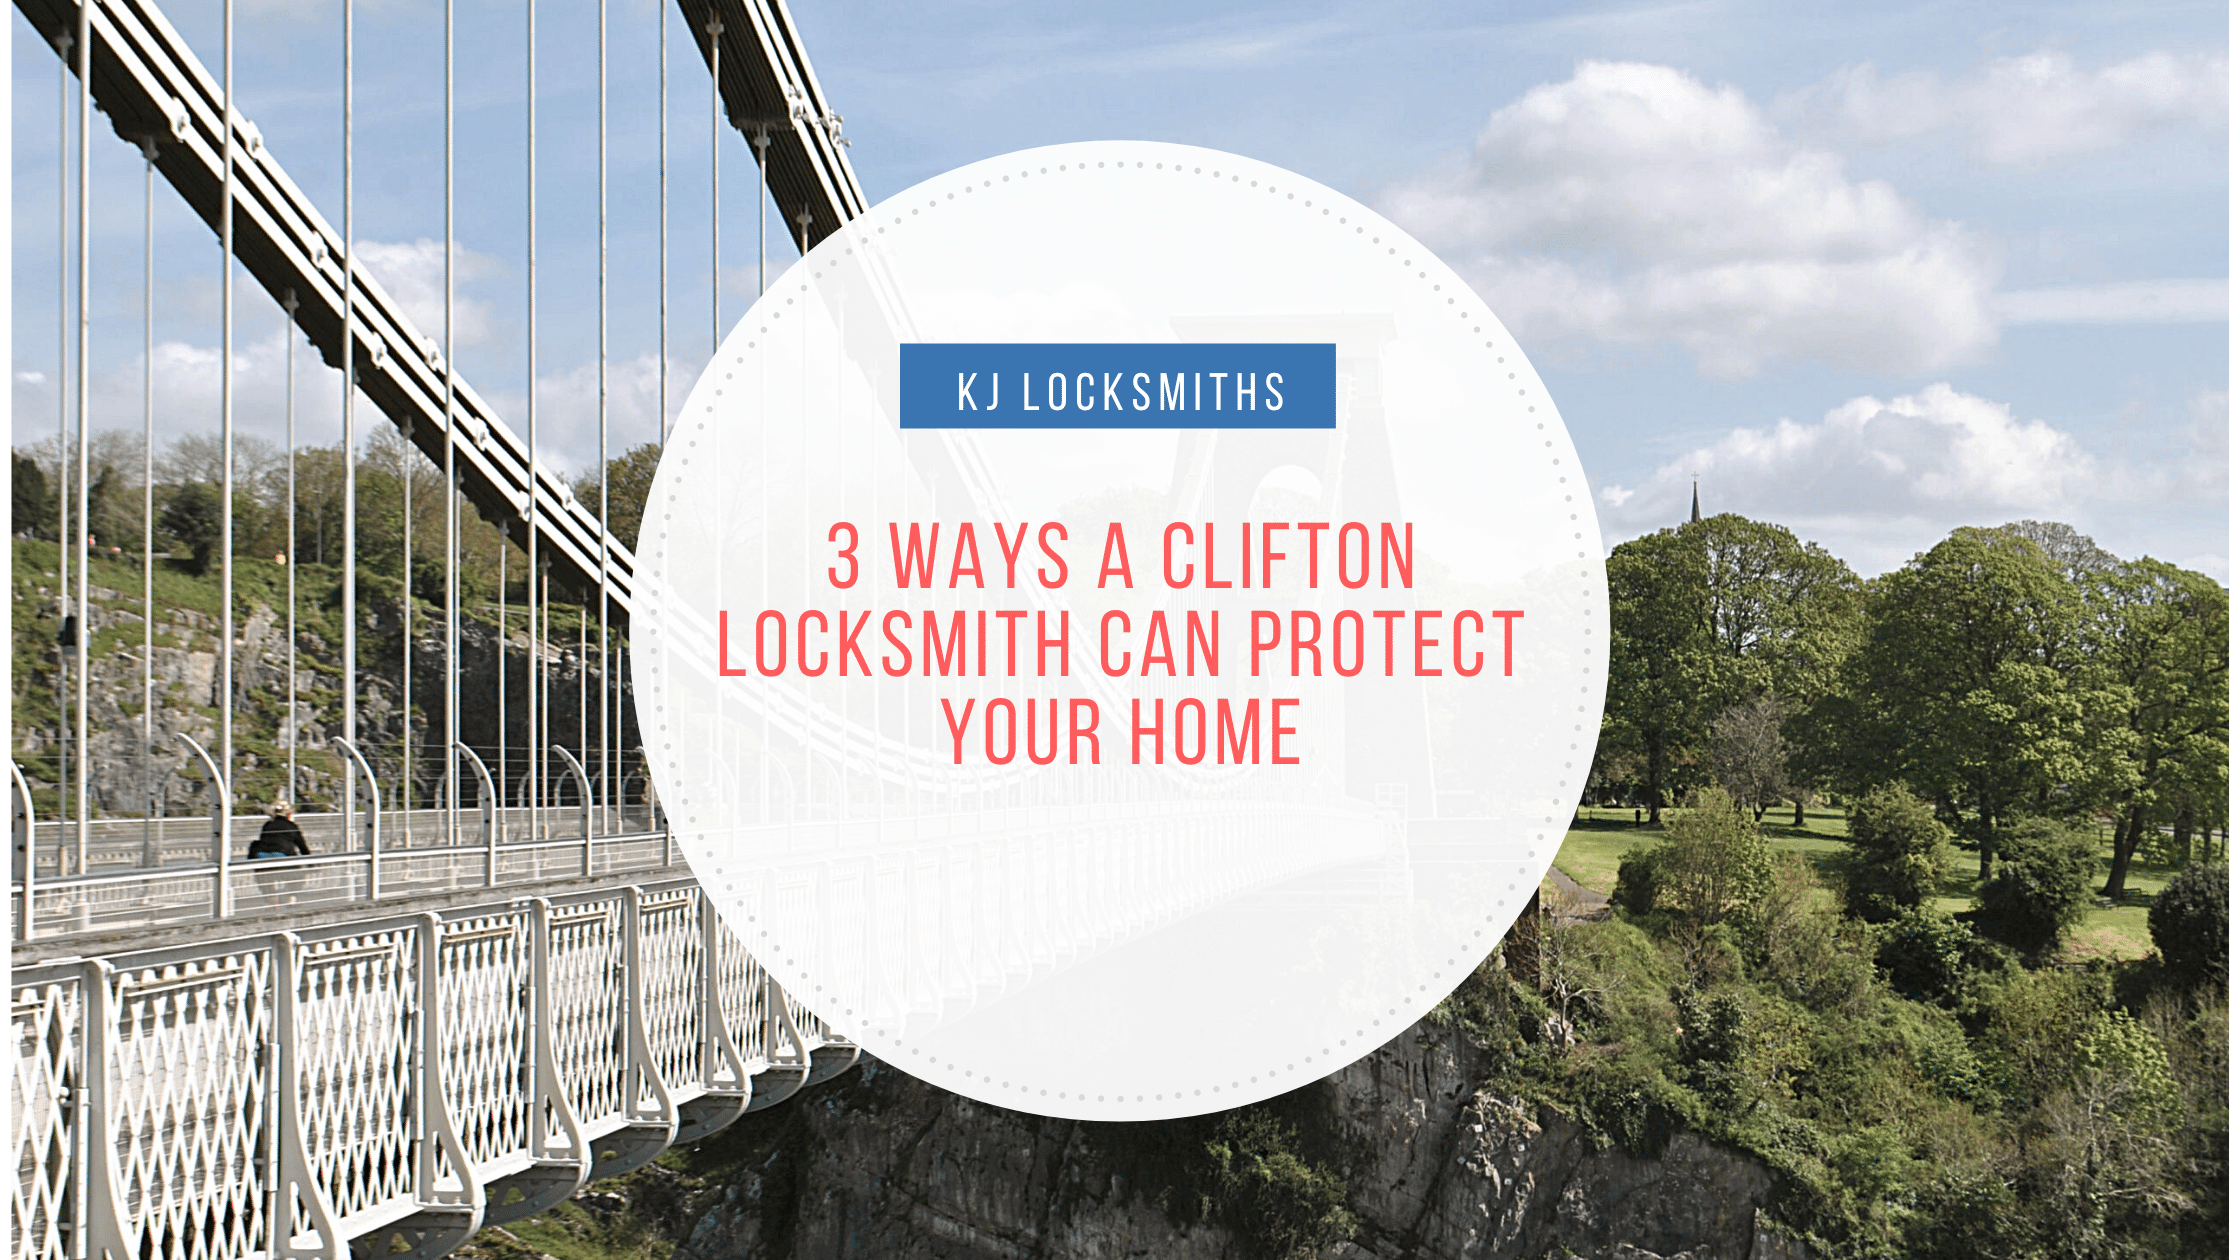 3 Ways a Clifton Locksmith Can Help Protect Your Home